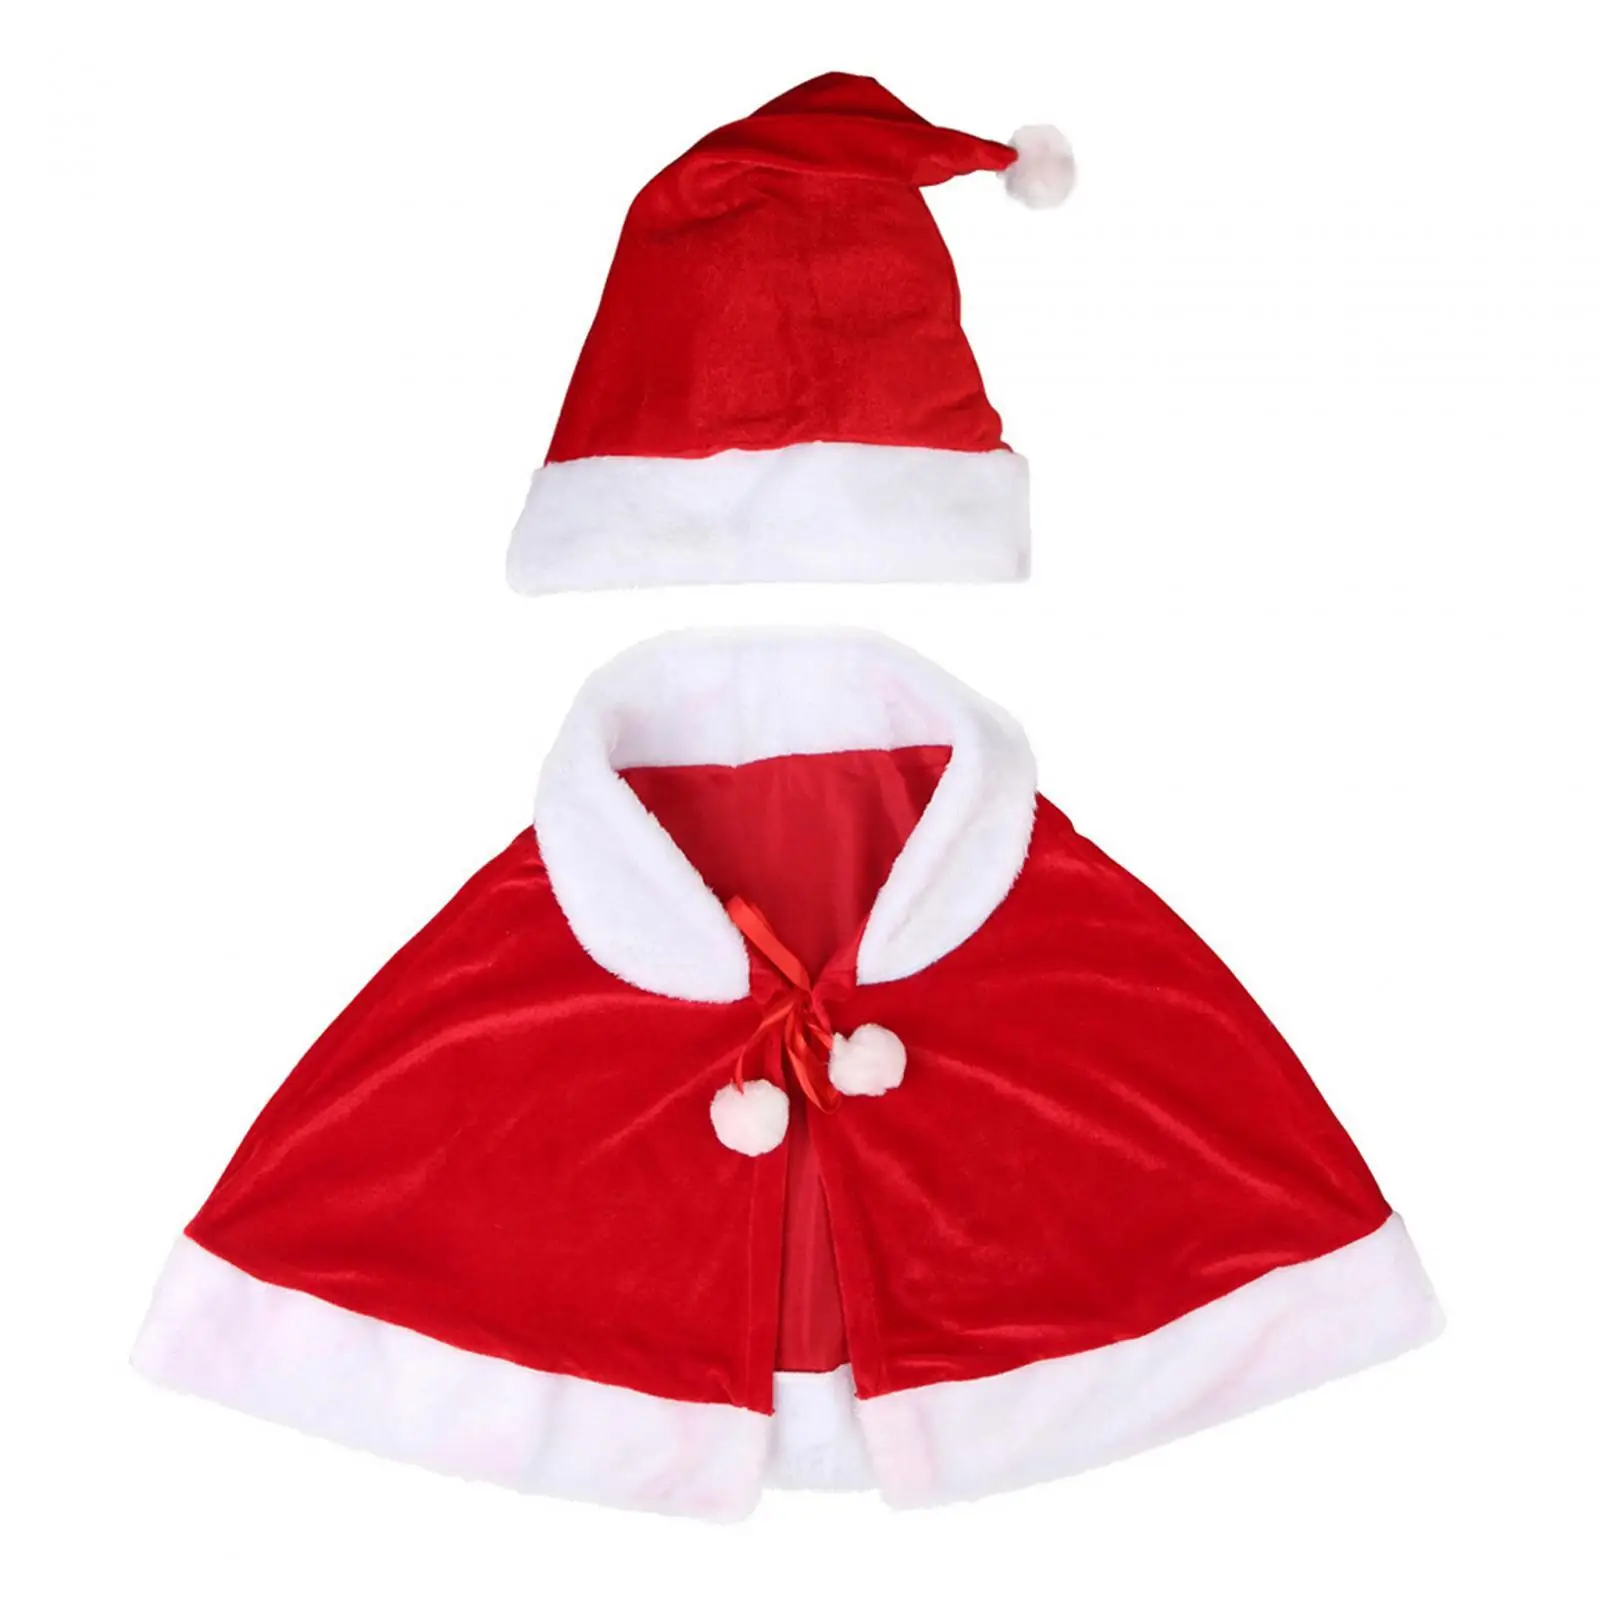 Christmas Shawl Cloak Cape with Hat Xmas Shawl with Plush Balls Lace up Santa Claus Cape Robe Red Cape for Role Play Props